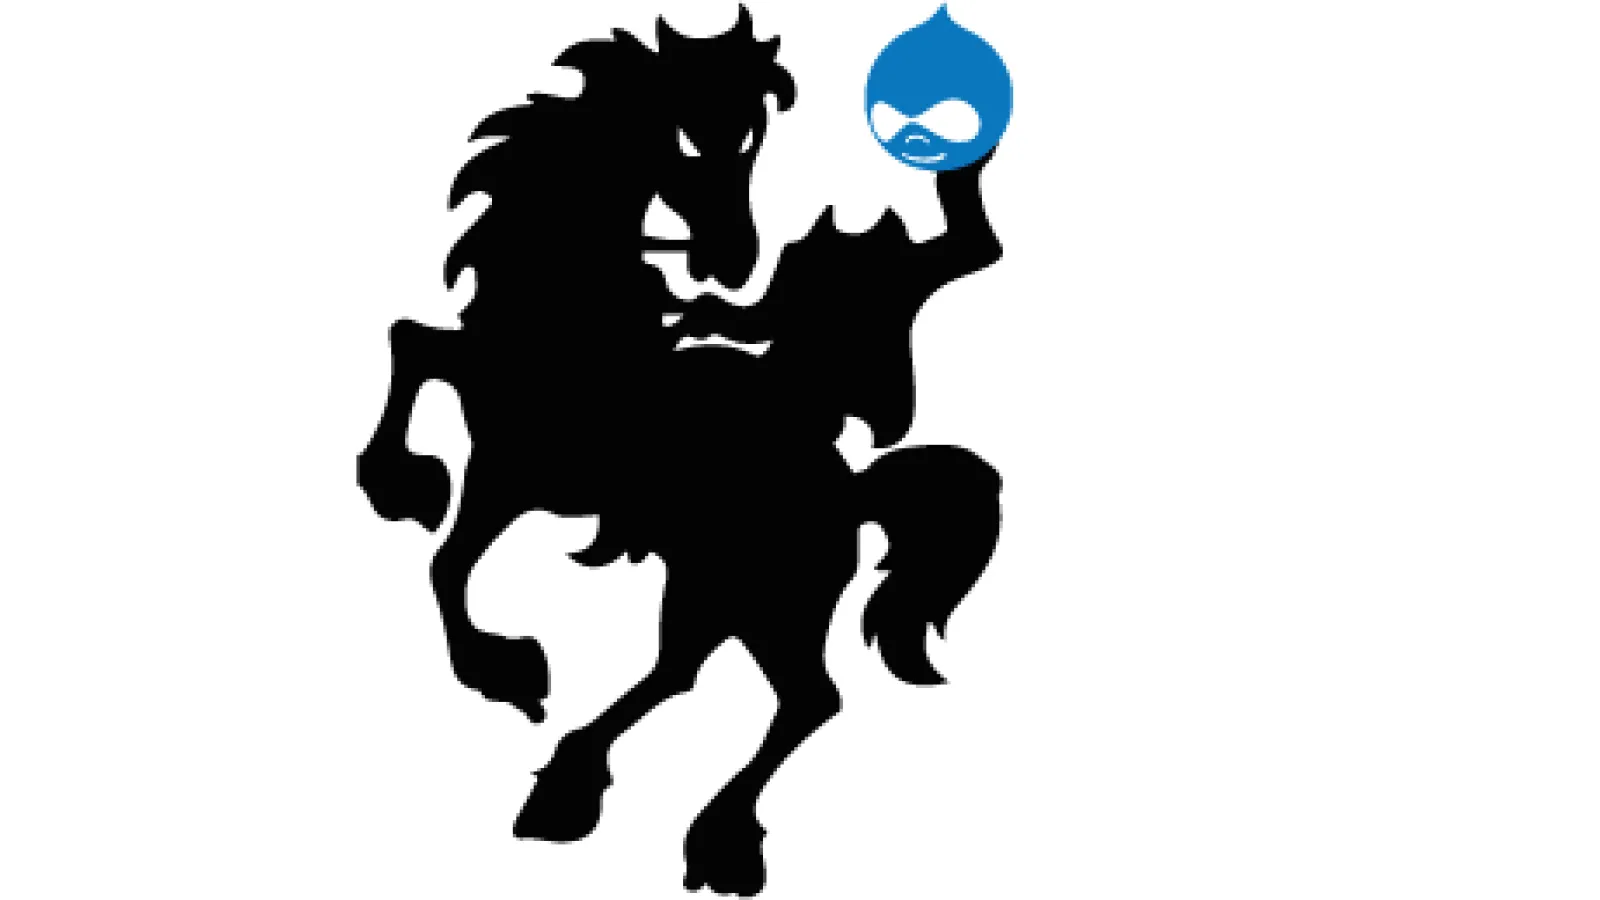 Headless Drupal: Driving User-Experience on the Mobile Web